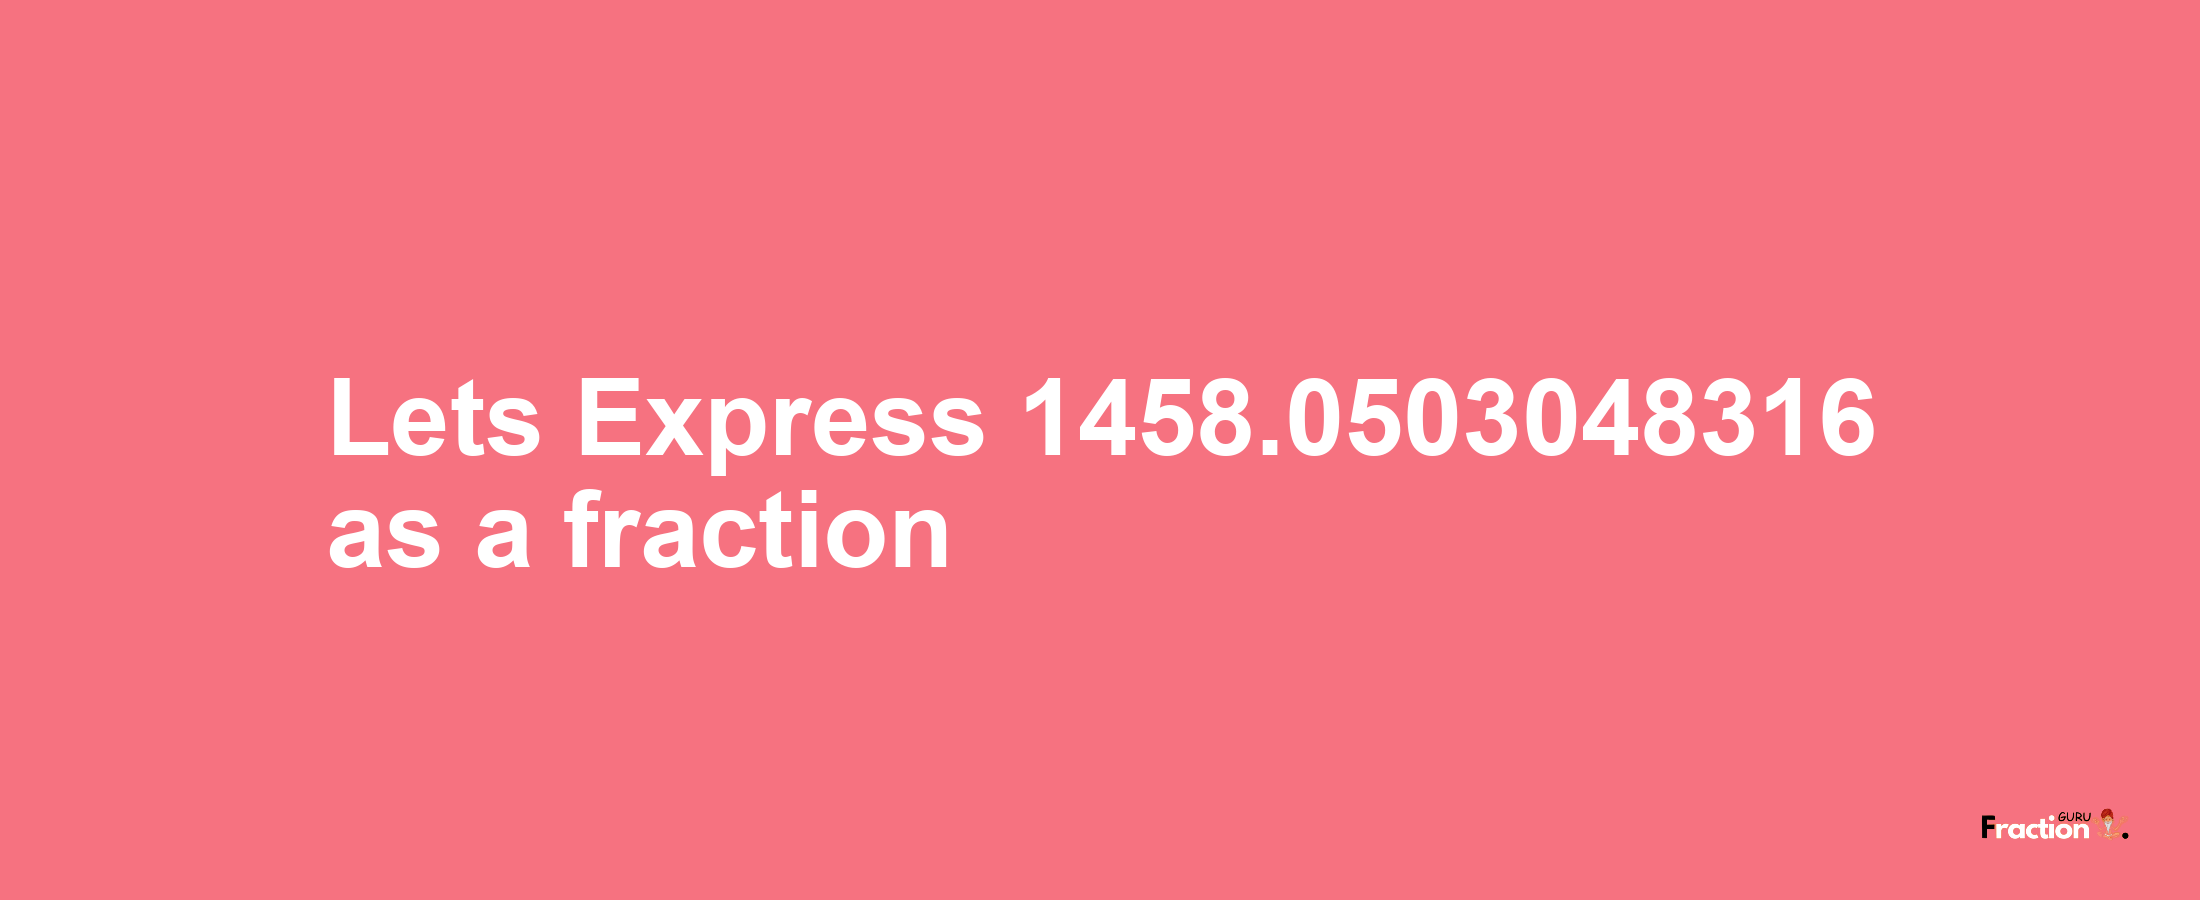 Lets Express 1458.0503048316 as afraction